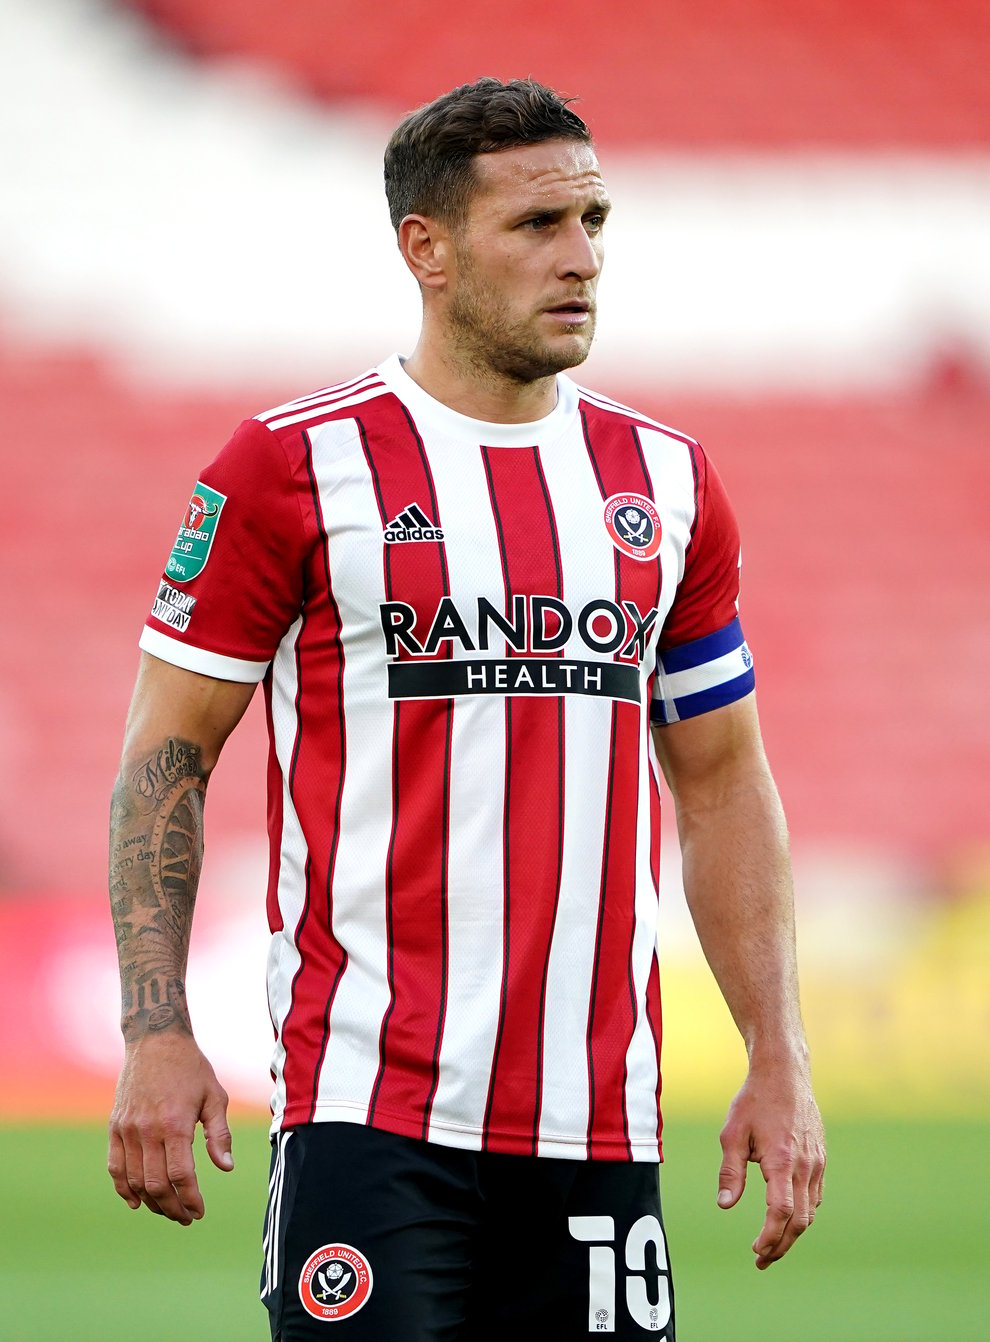 Billy Sharp could start for Sheffield United after scoring at the weekend (Zac Goodwin/PA)